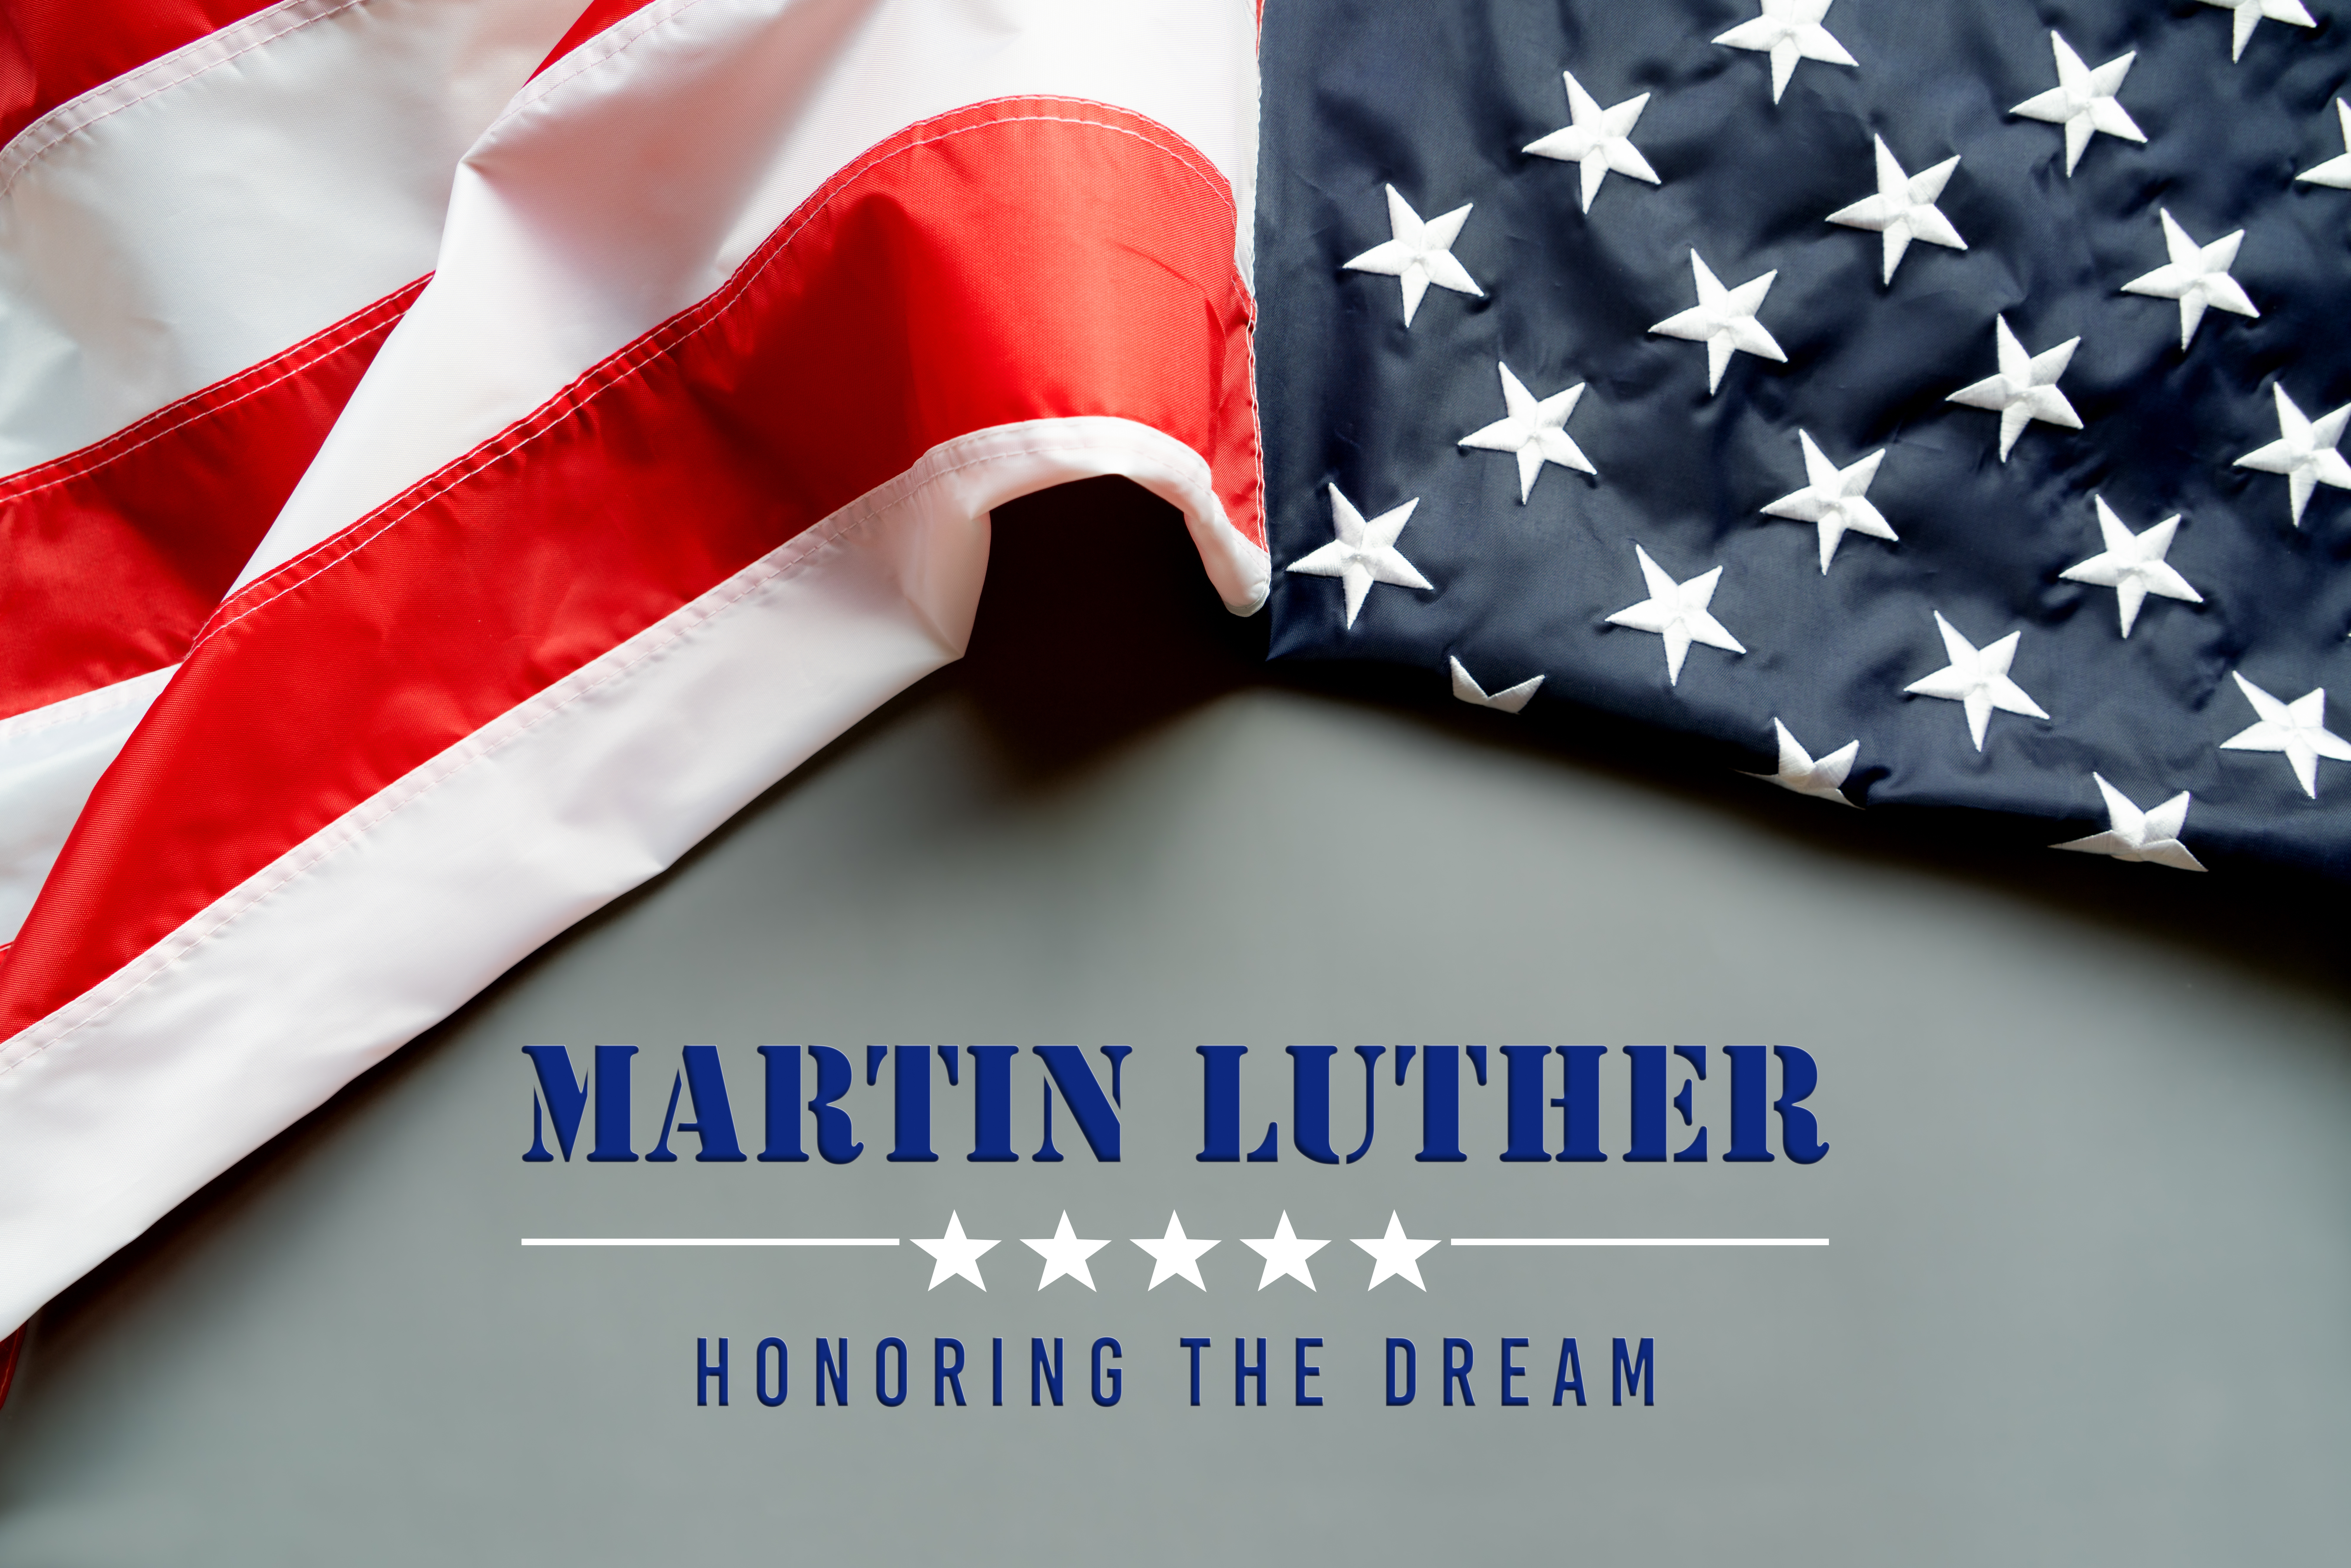 Honor Martin Luther King, Jr. day, January 15th